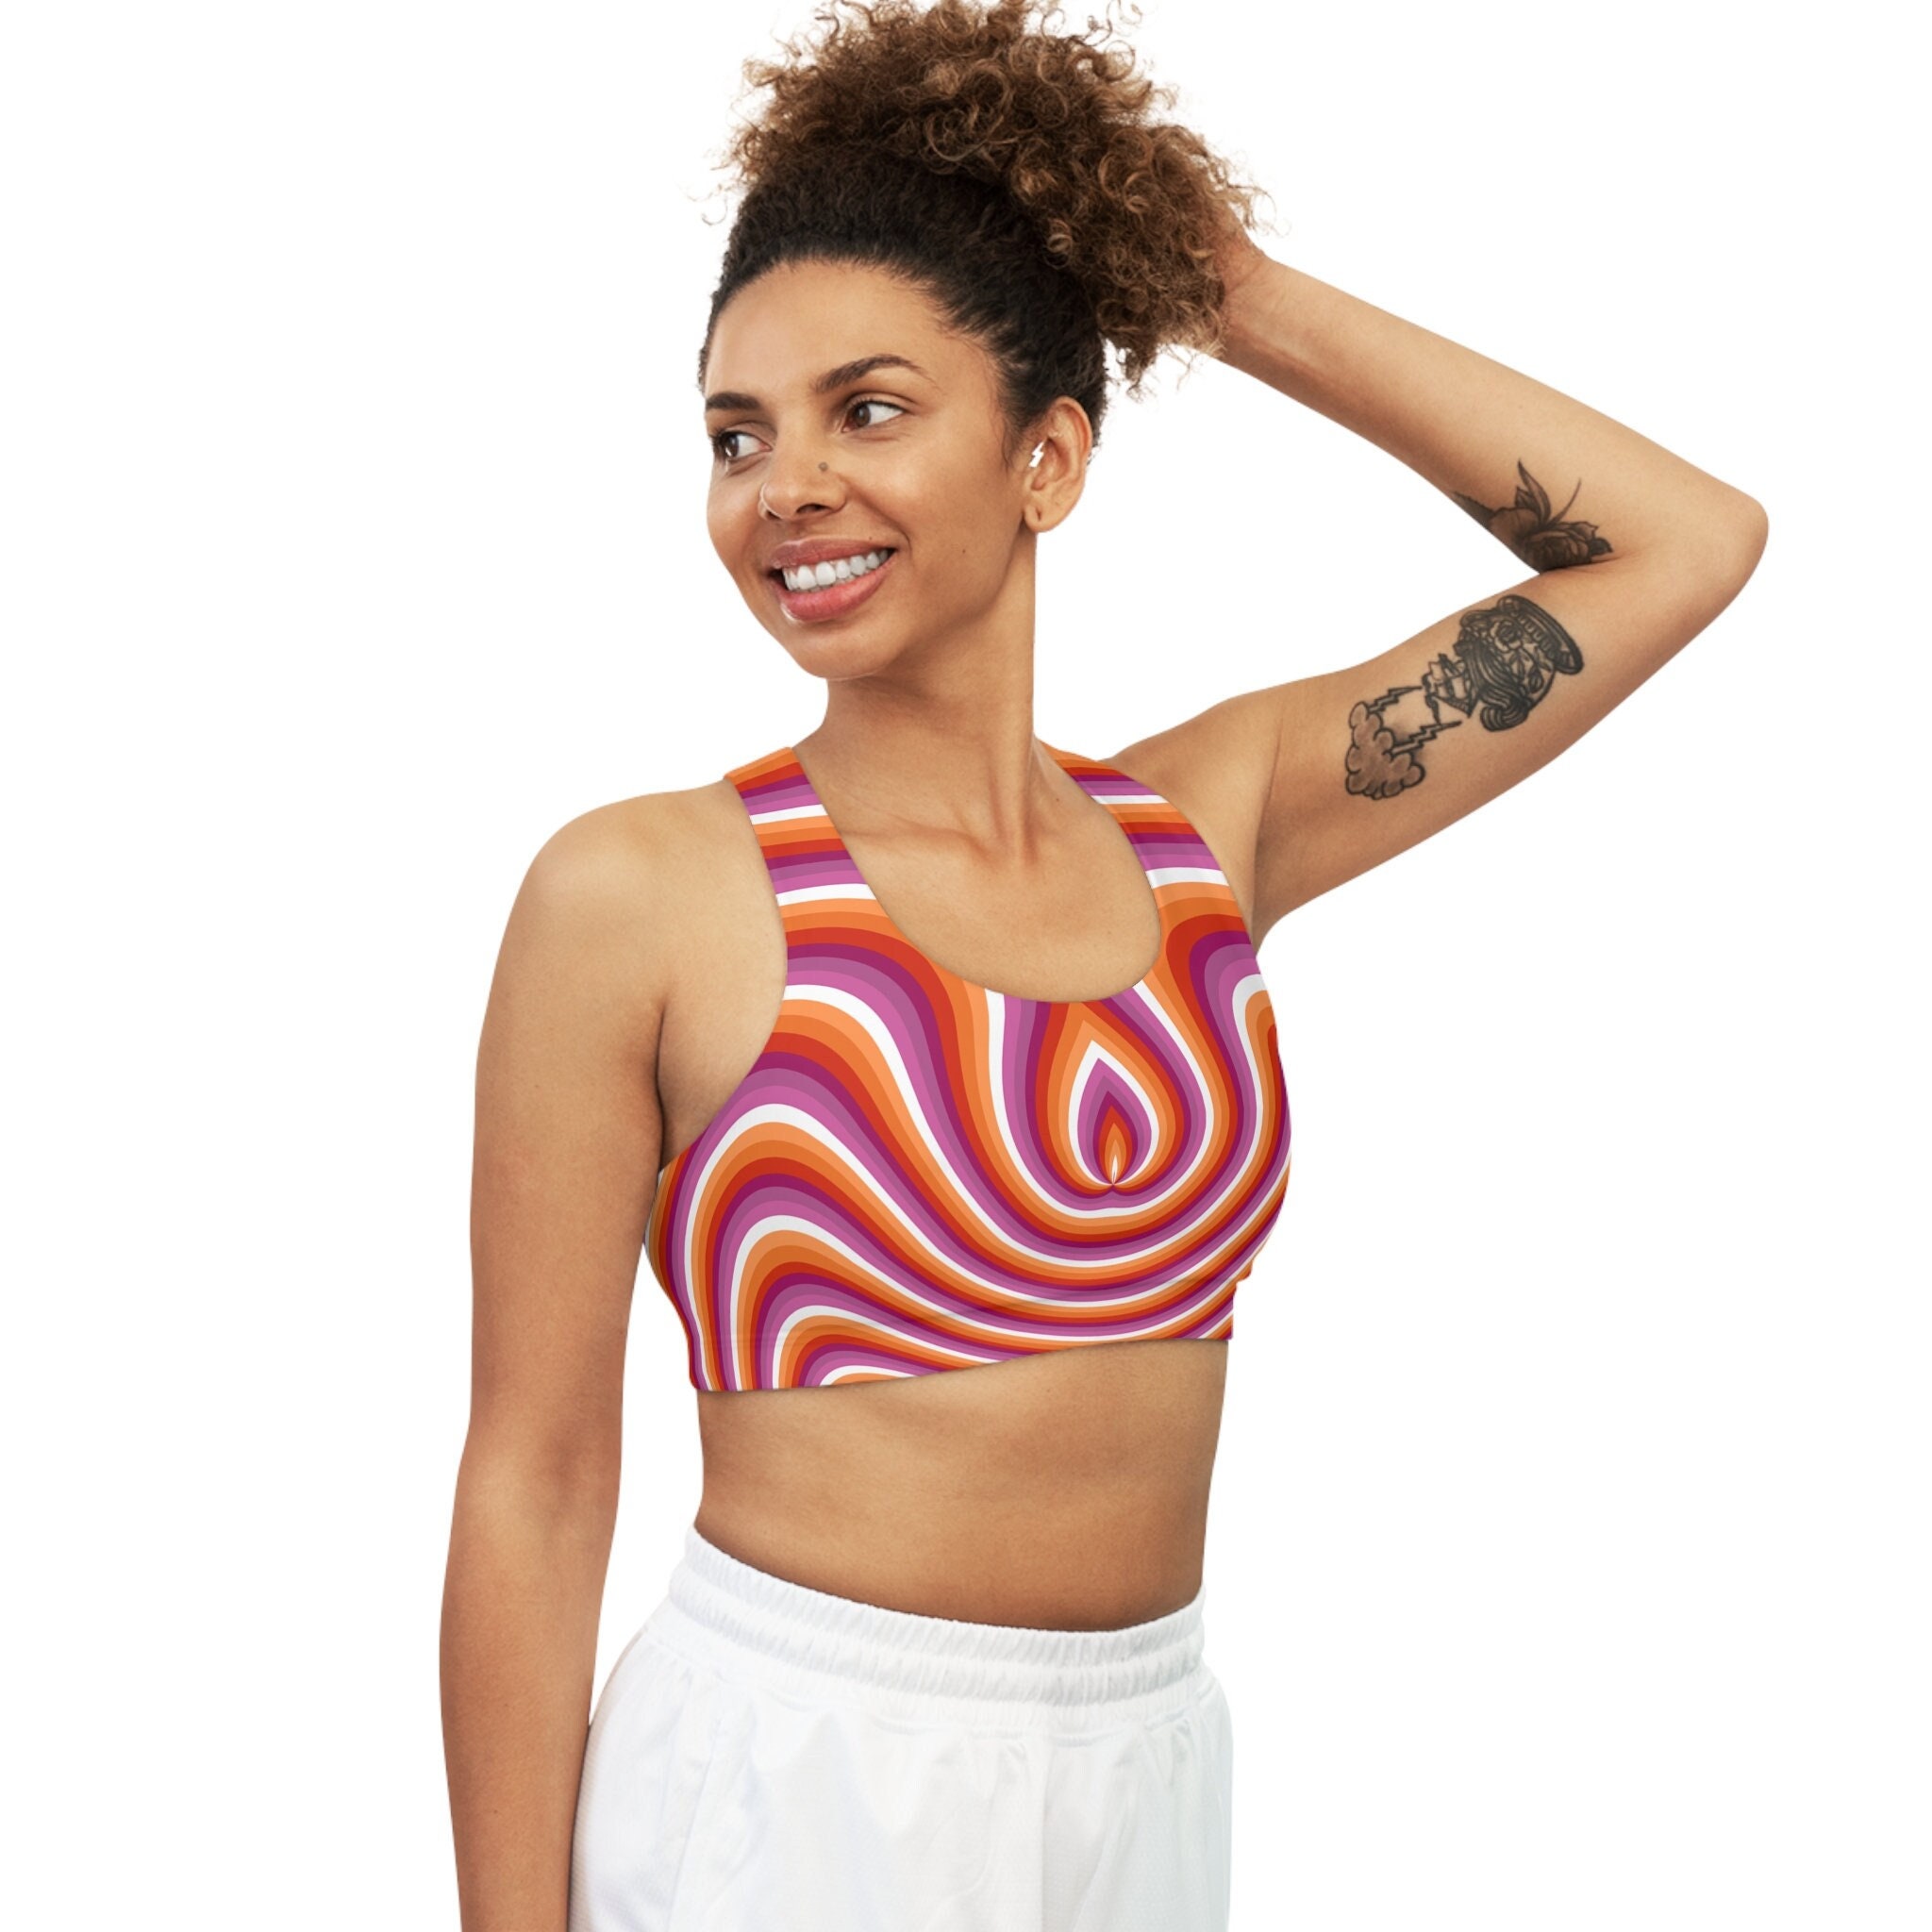 Vibrant Expression: Lesbian Pride Pouring Paint Sports Bra Suit in Lesbian  Colors”, by Payalvats